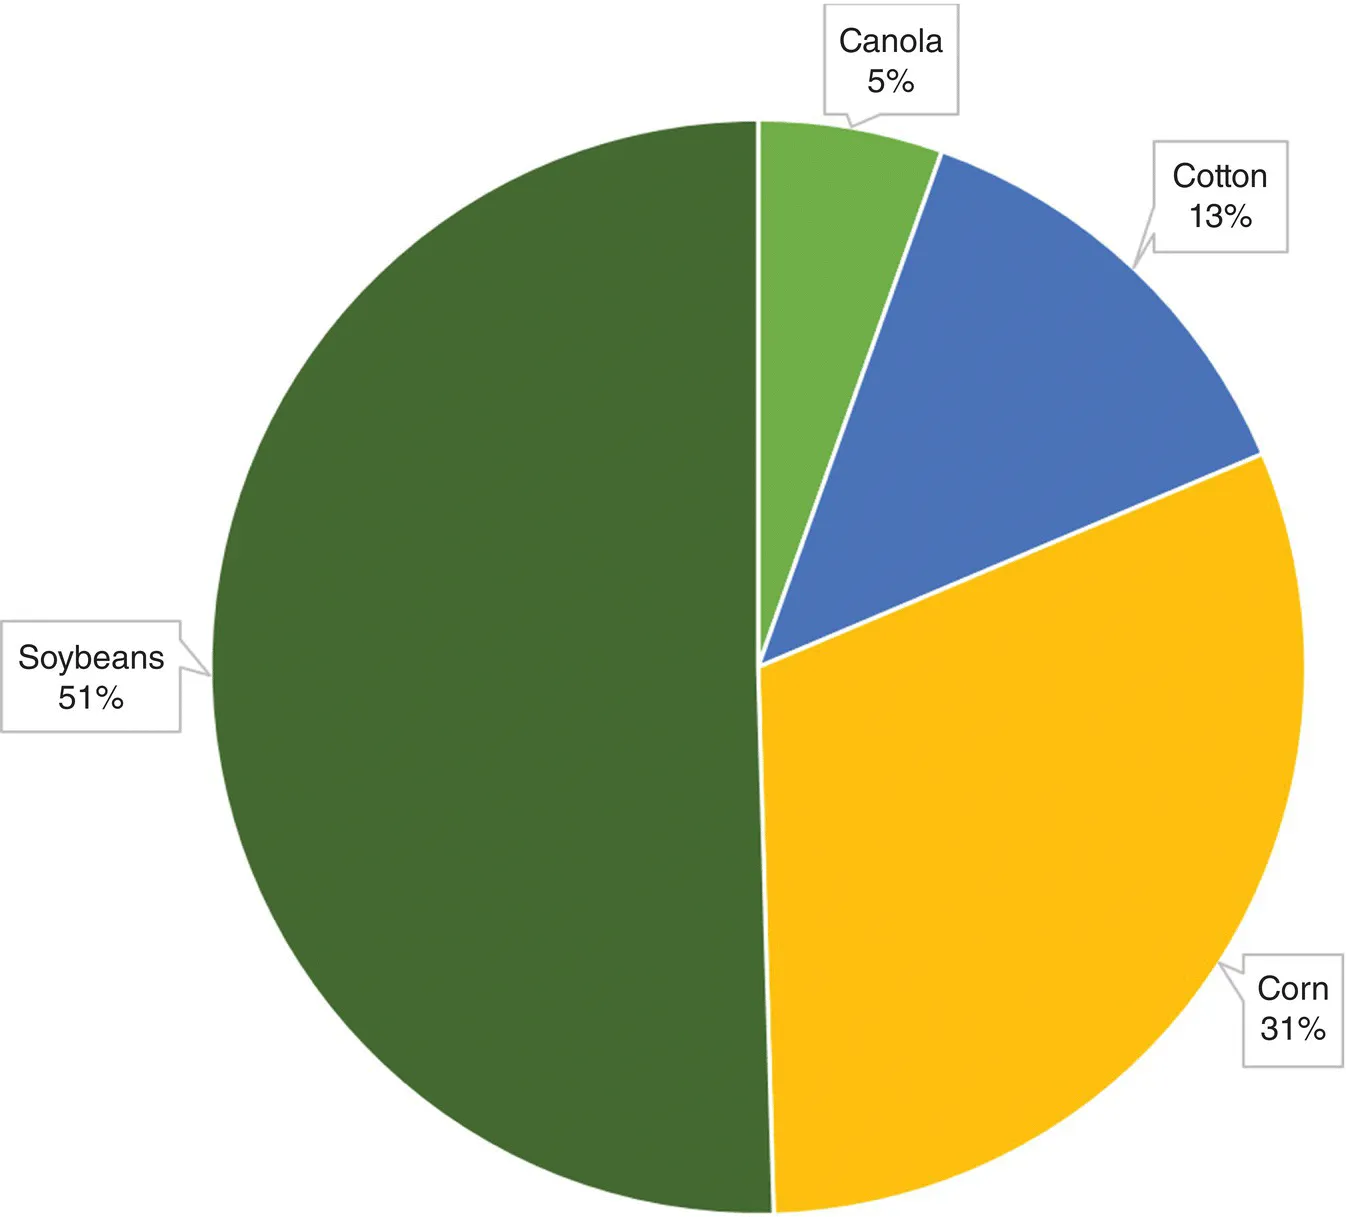 Pie graph of the global GM crop plantings in 2012 by crop displaying Soybeans 51%, Canola 5%, Cotton 13%, and Corn 31%.